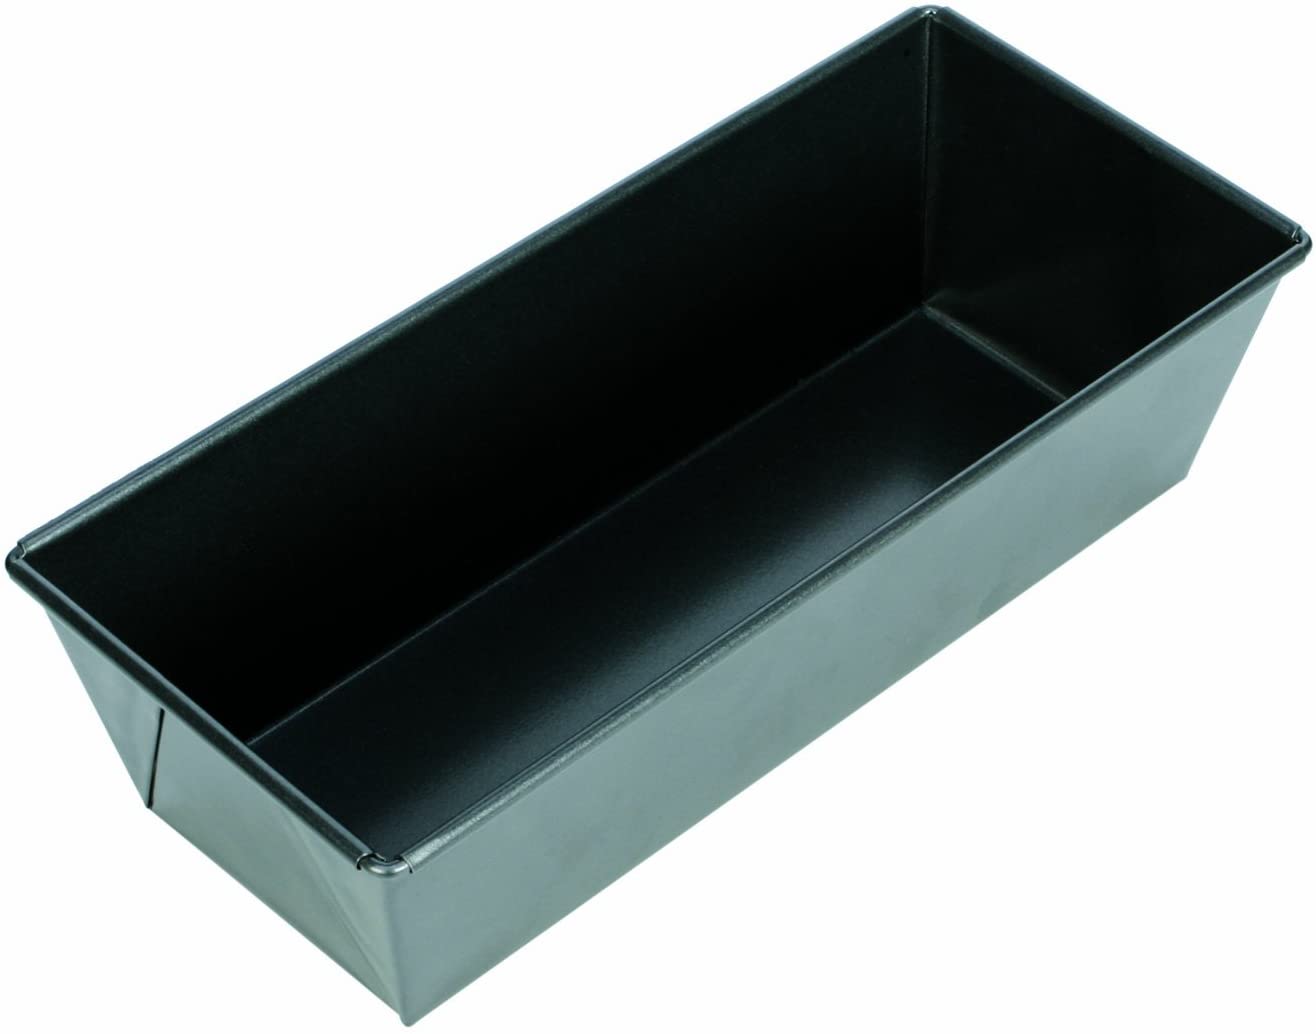 Tescoma Delicia 30 x 11 cm Loaf Pan